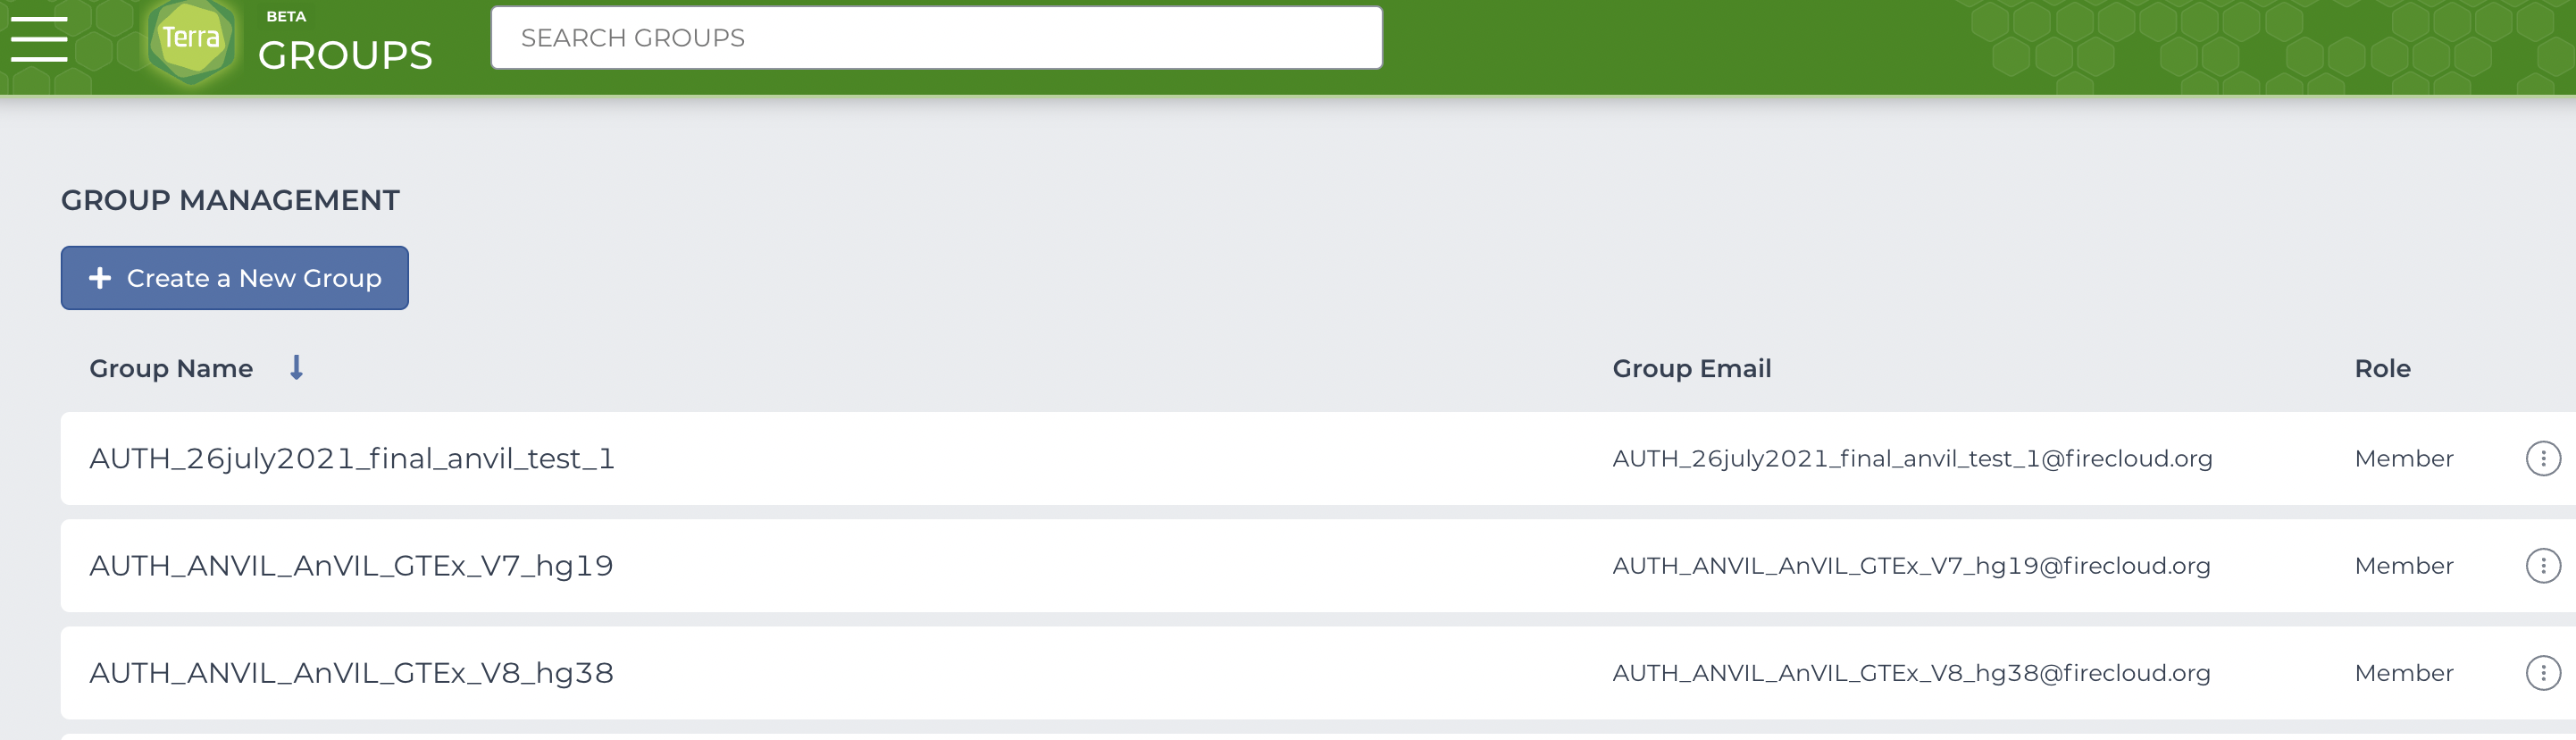 Screenshot og groups page in Terra, with three groups in the list and the create group button above the list.